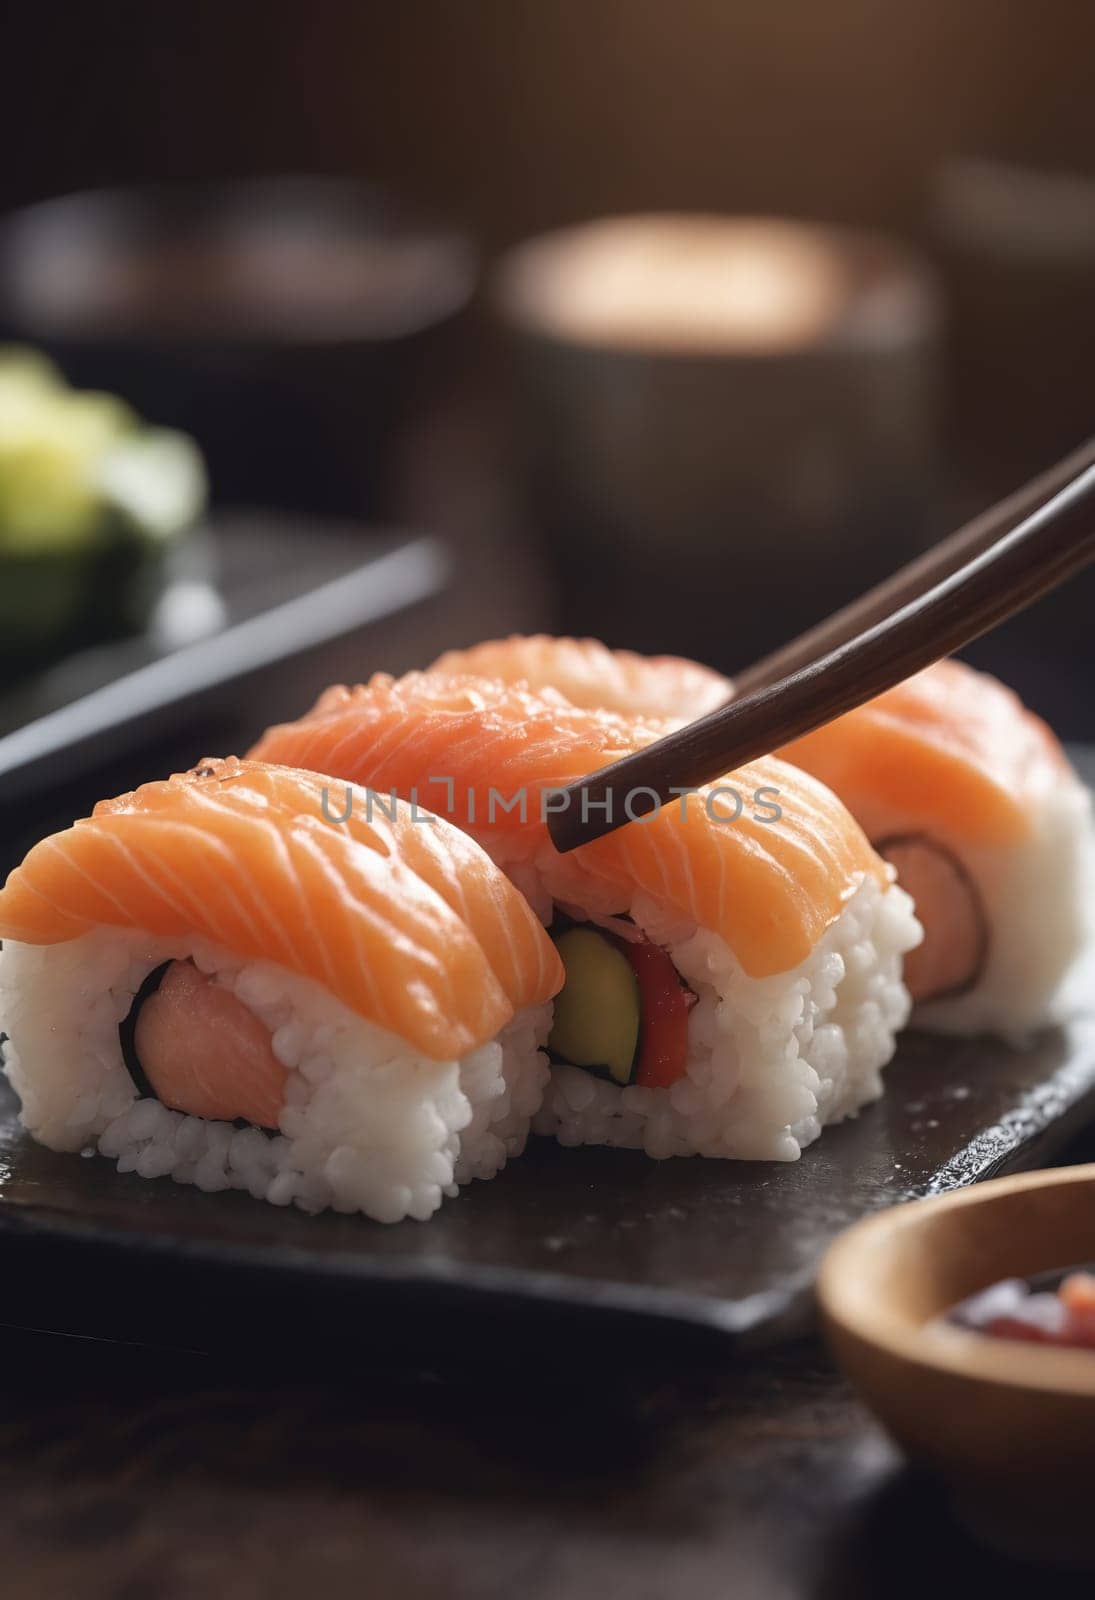 The person is enjoying California roll sushi with chopsticks on a plate, savoring the fresh ingredients and flavors of this delicious cuisine dish